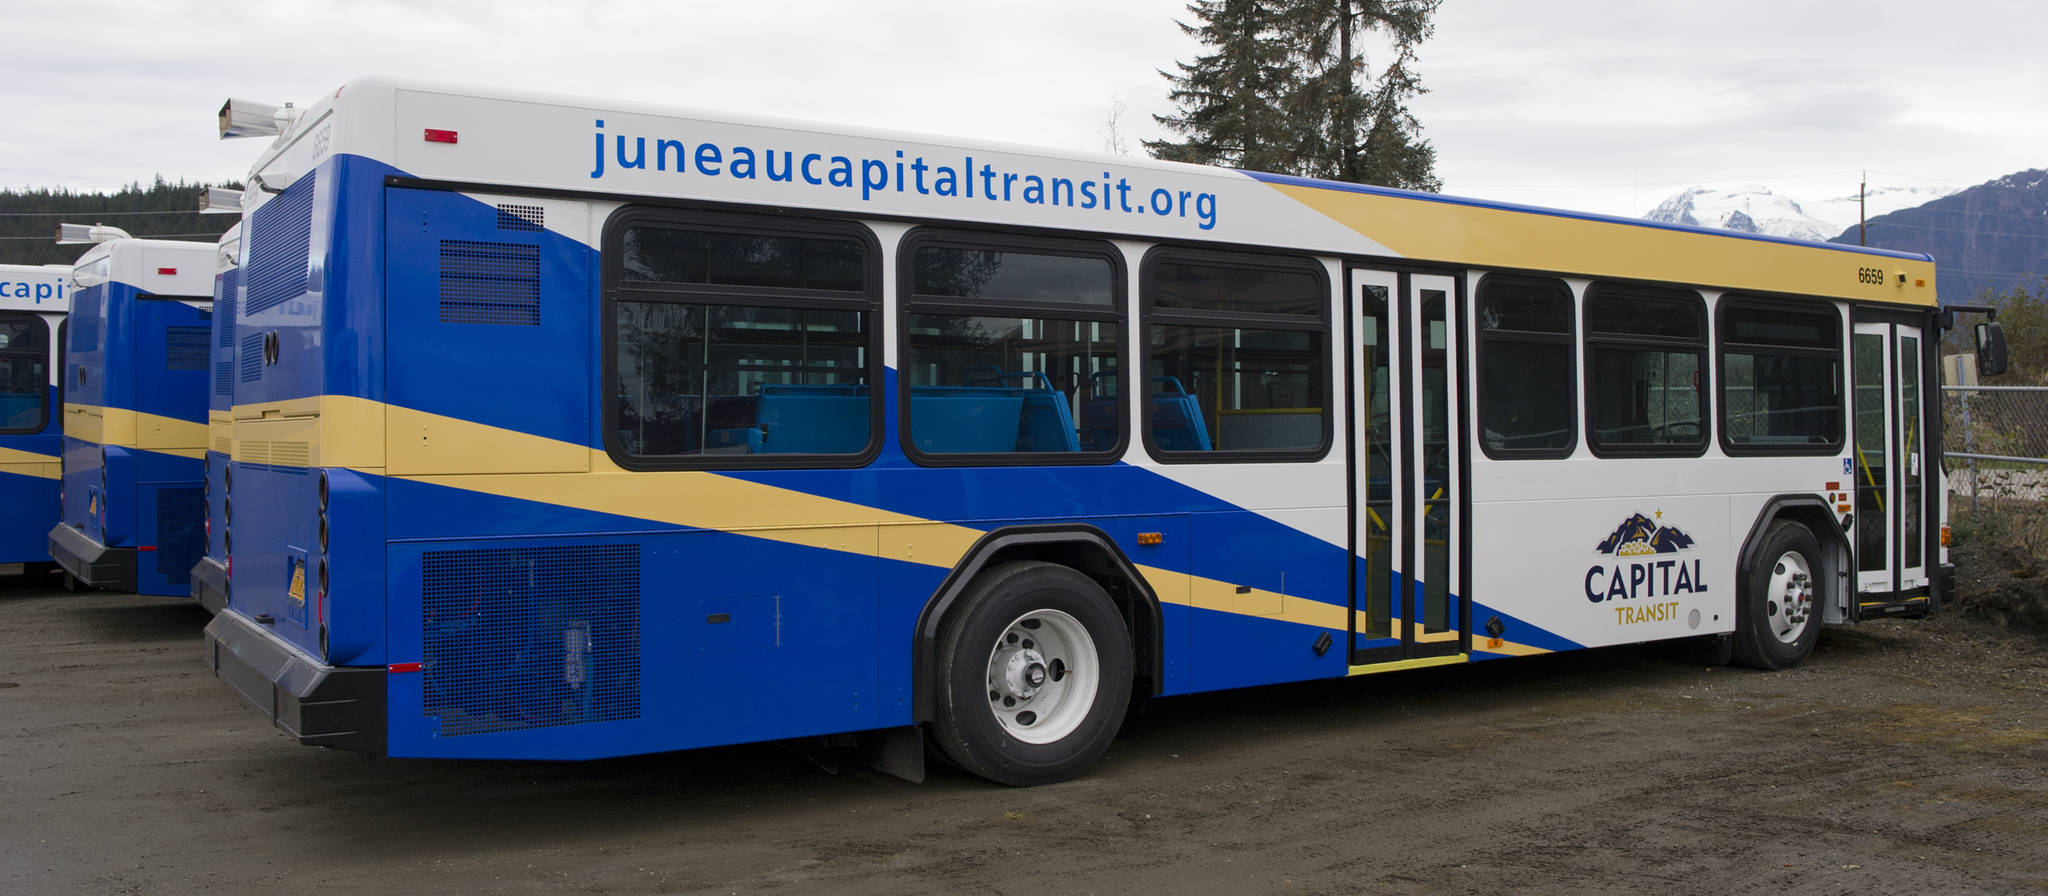 A Capital Transit bus is pictured in this October 2016 file photo. (Juneau Empire File)